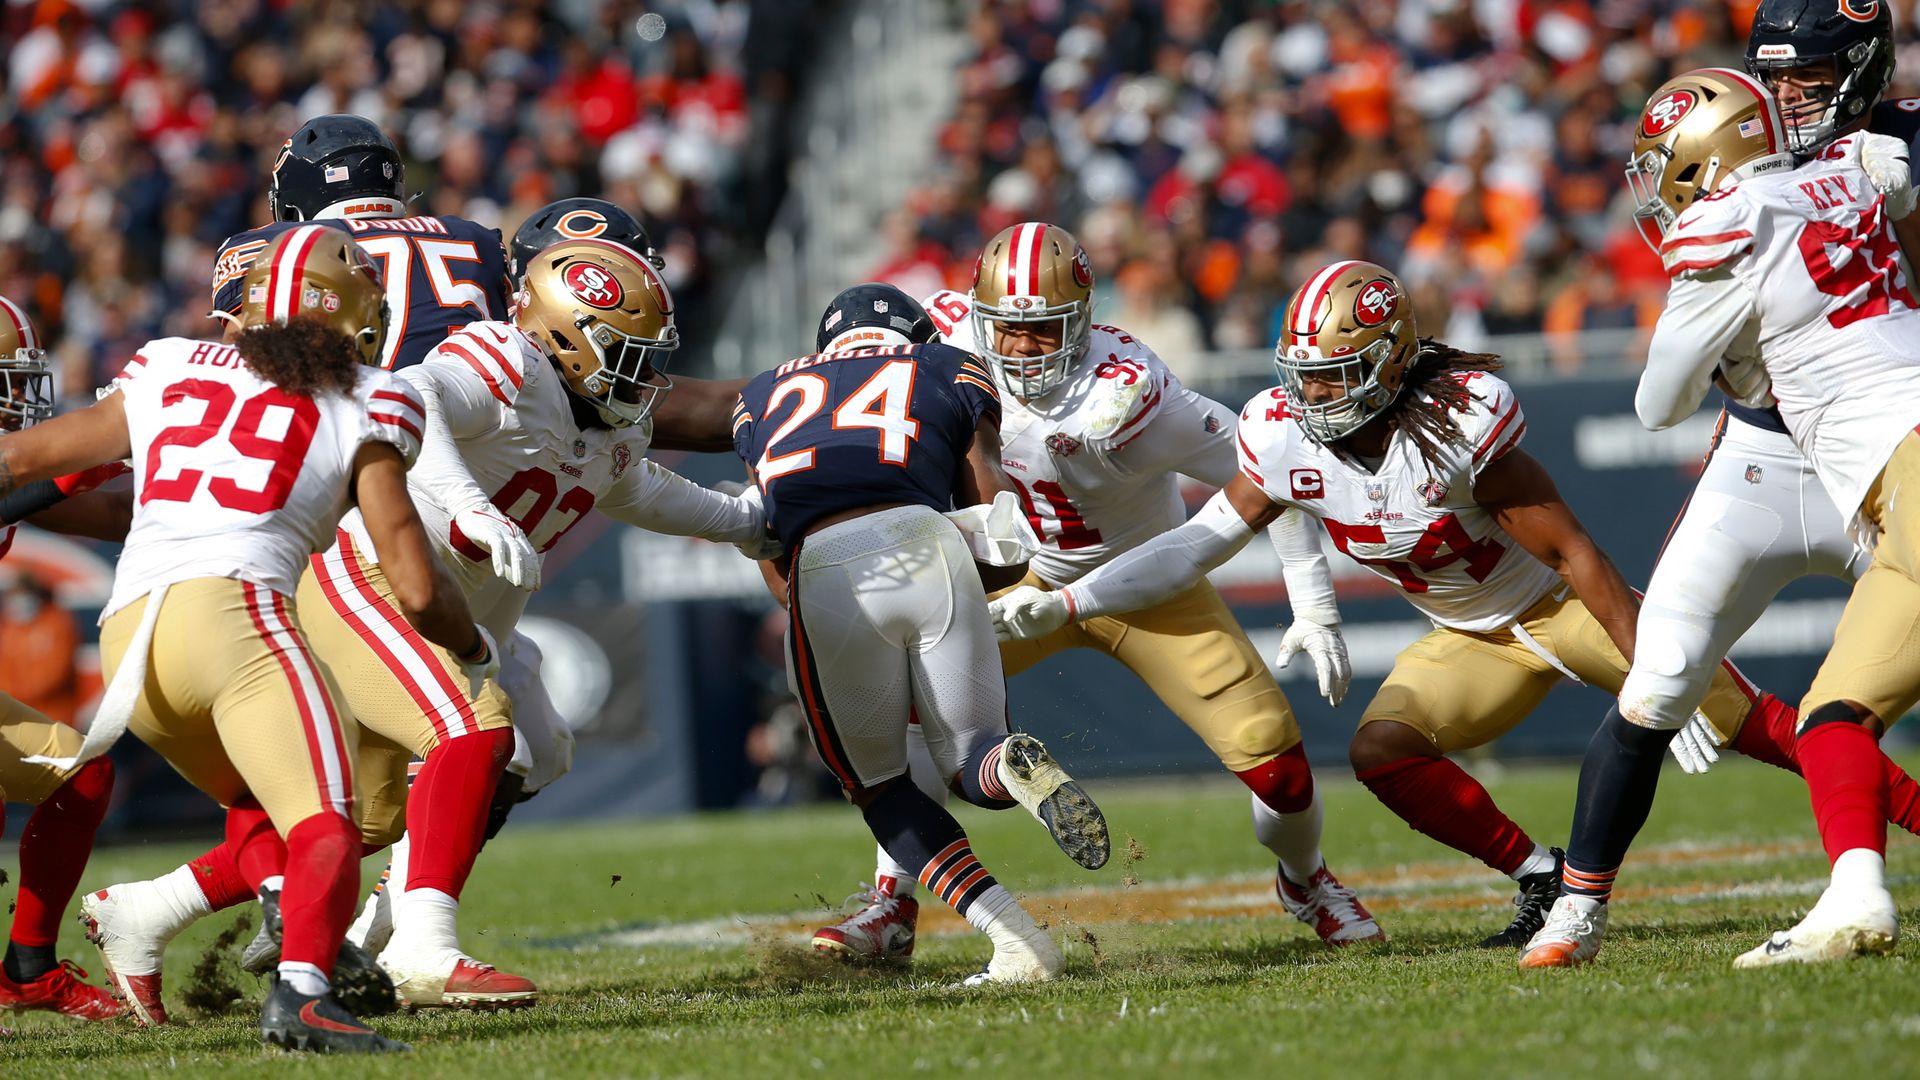 Chicago Bear's player surrounded by 49ers